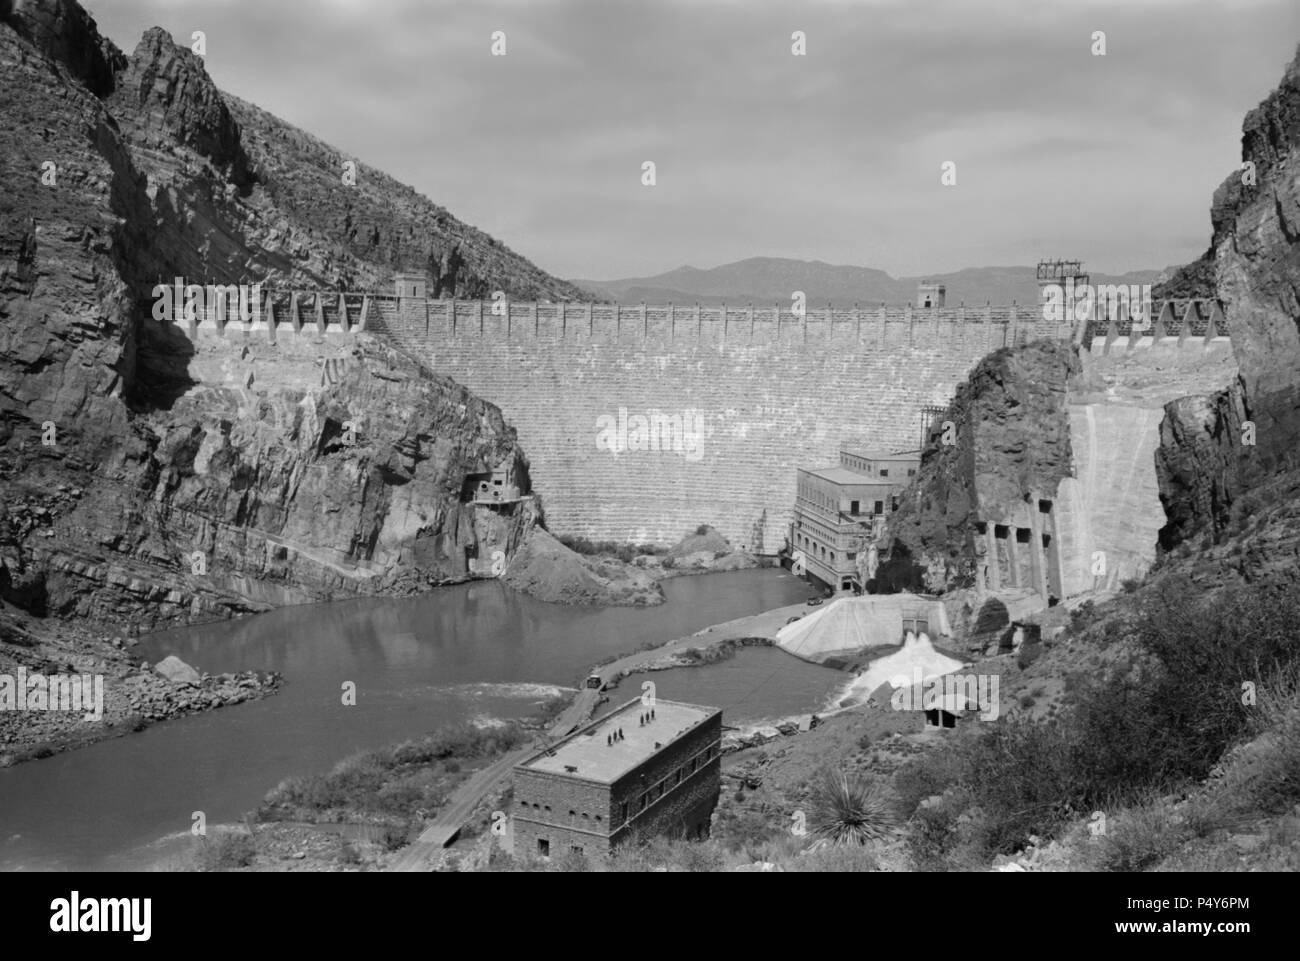 Roosevelt Dam, Roosevelt, Arizona, USA, Russell Lee, Farm Security Administration, May 1940 Stock Photo